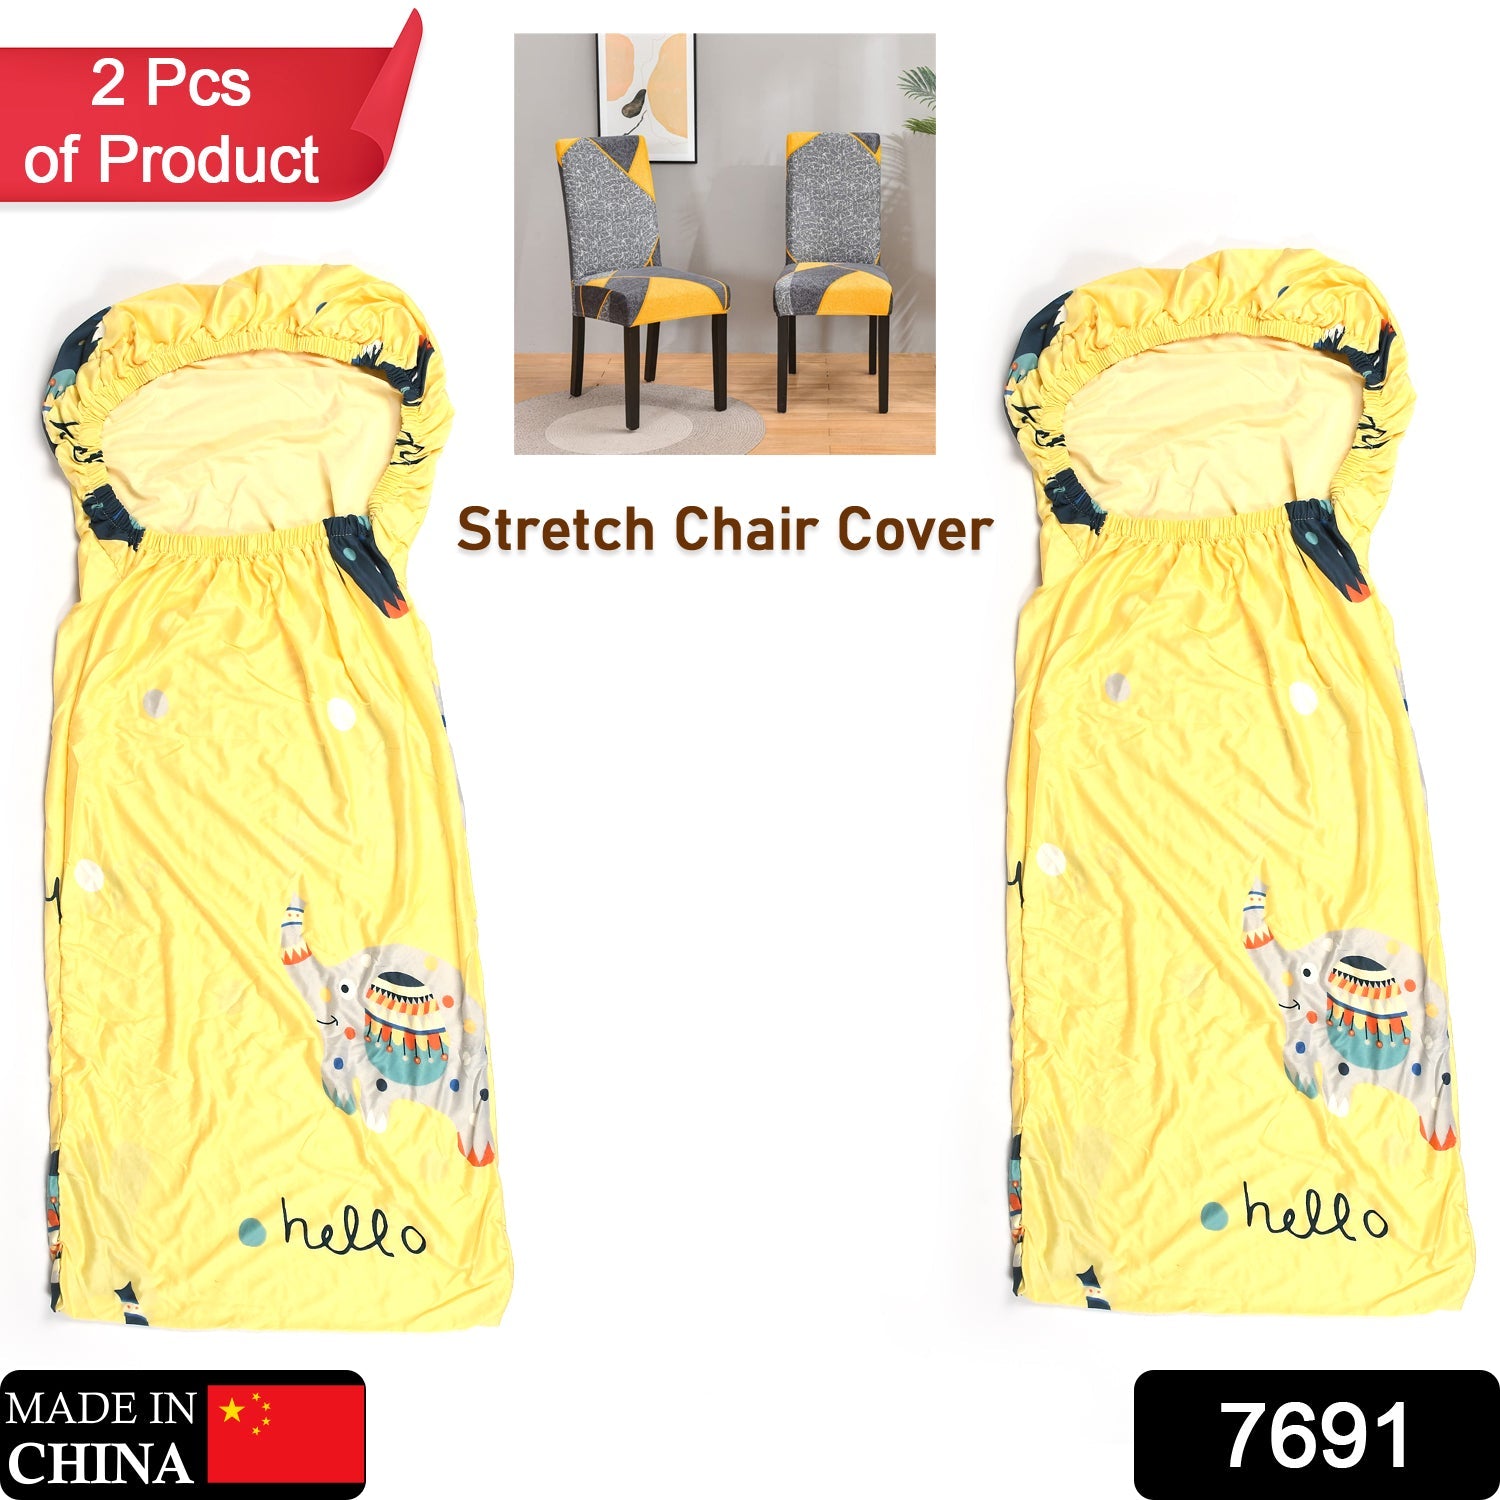 7691 Elastic Chair Cover Dining Chair Covers Set of 2 Stretchable , Washable Cover For Homes Chair Use